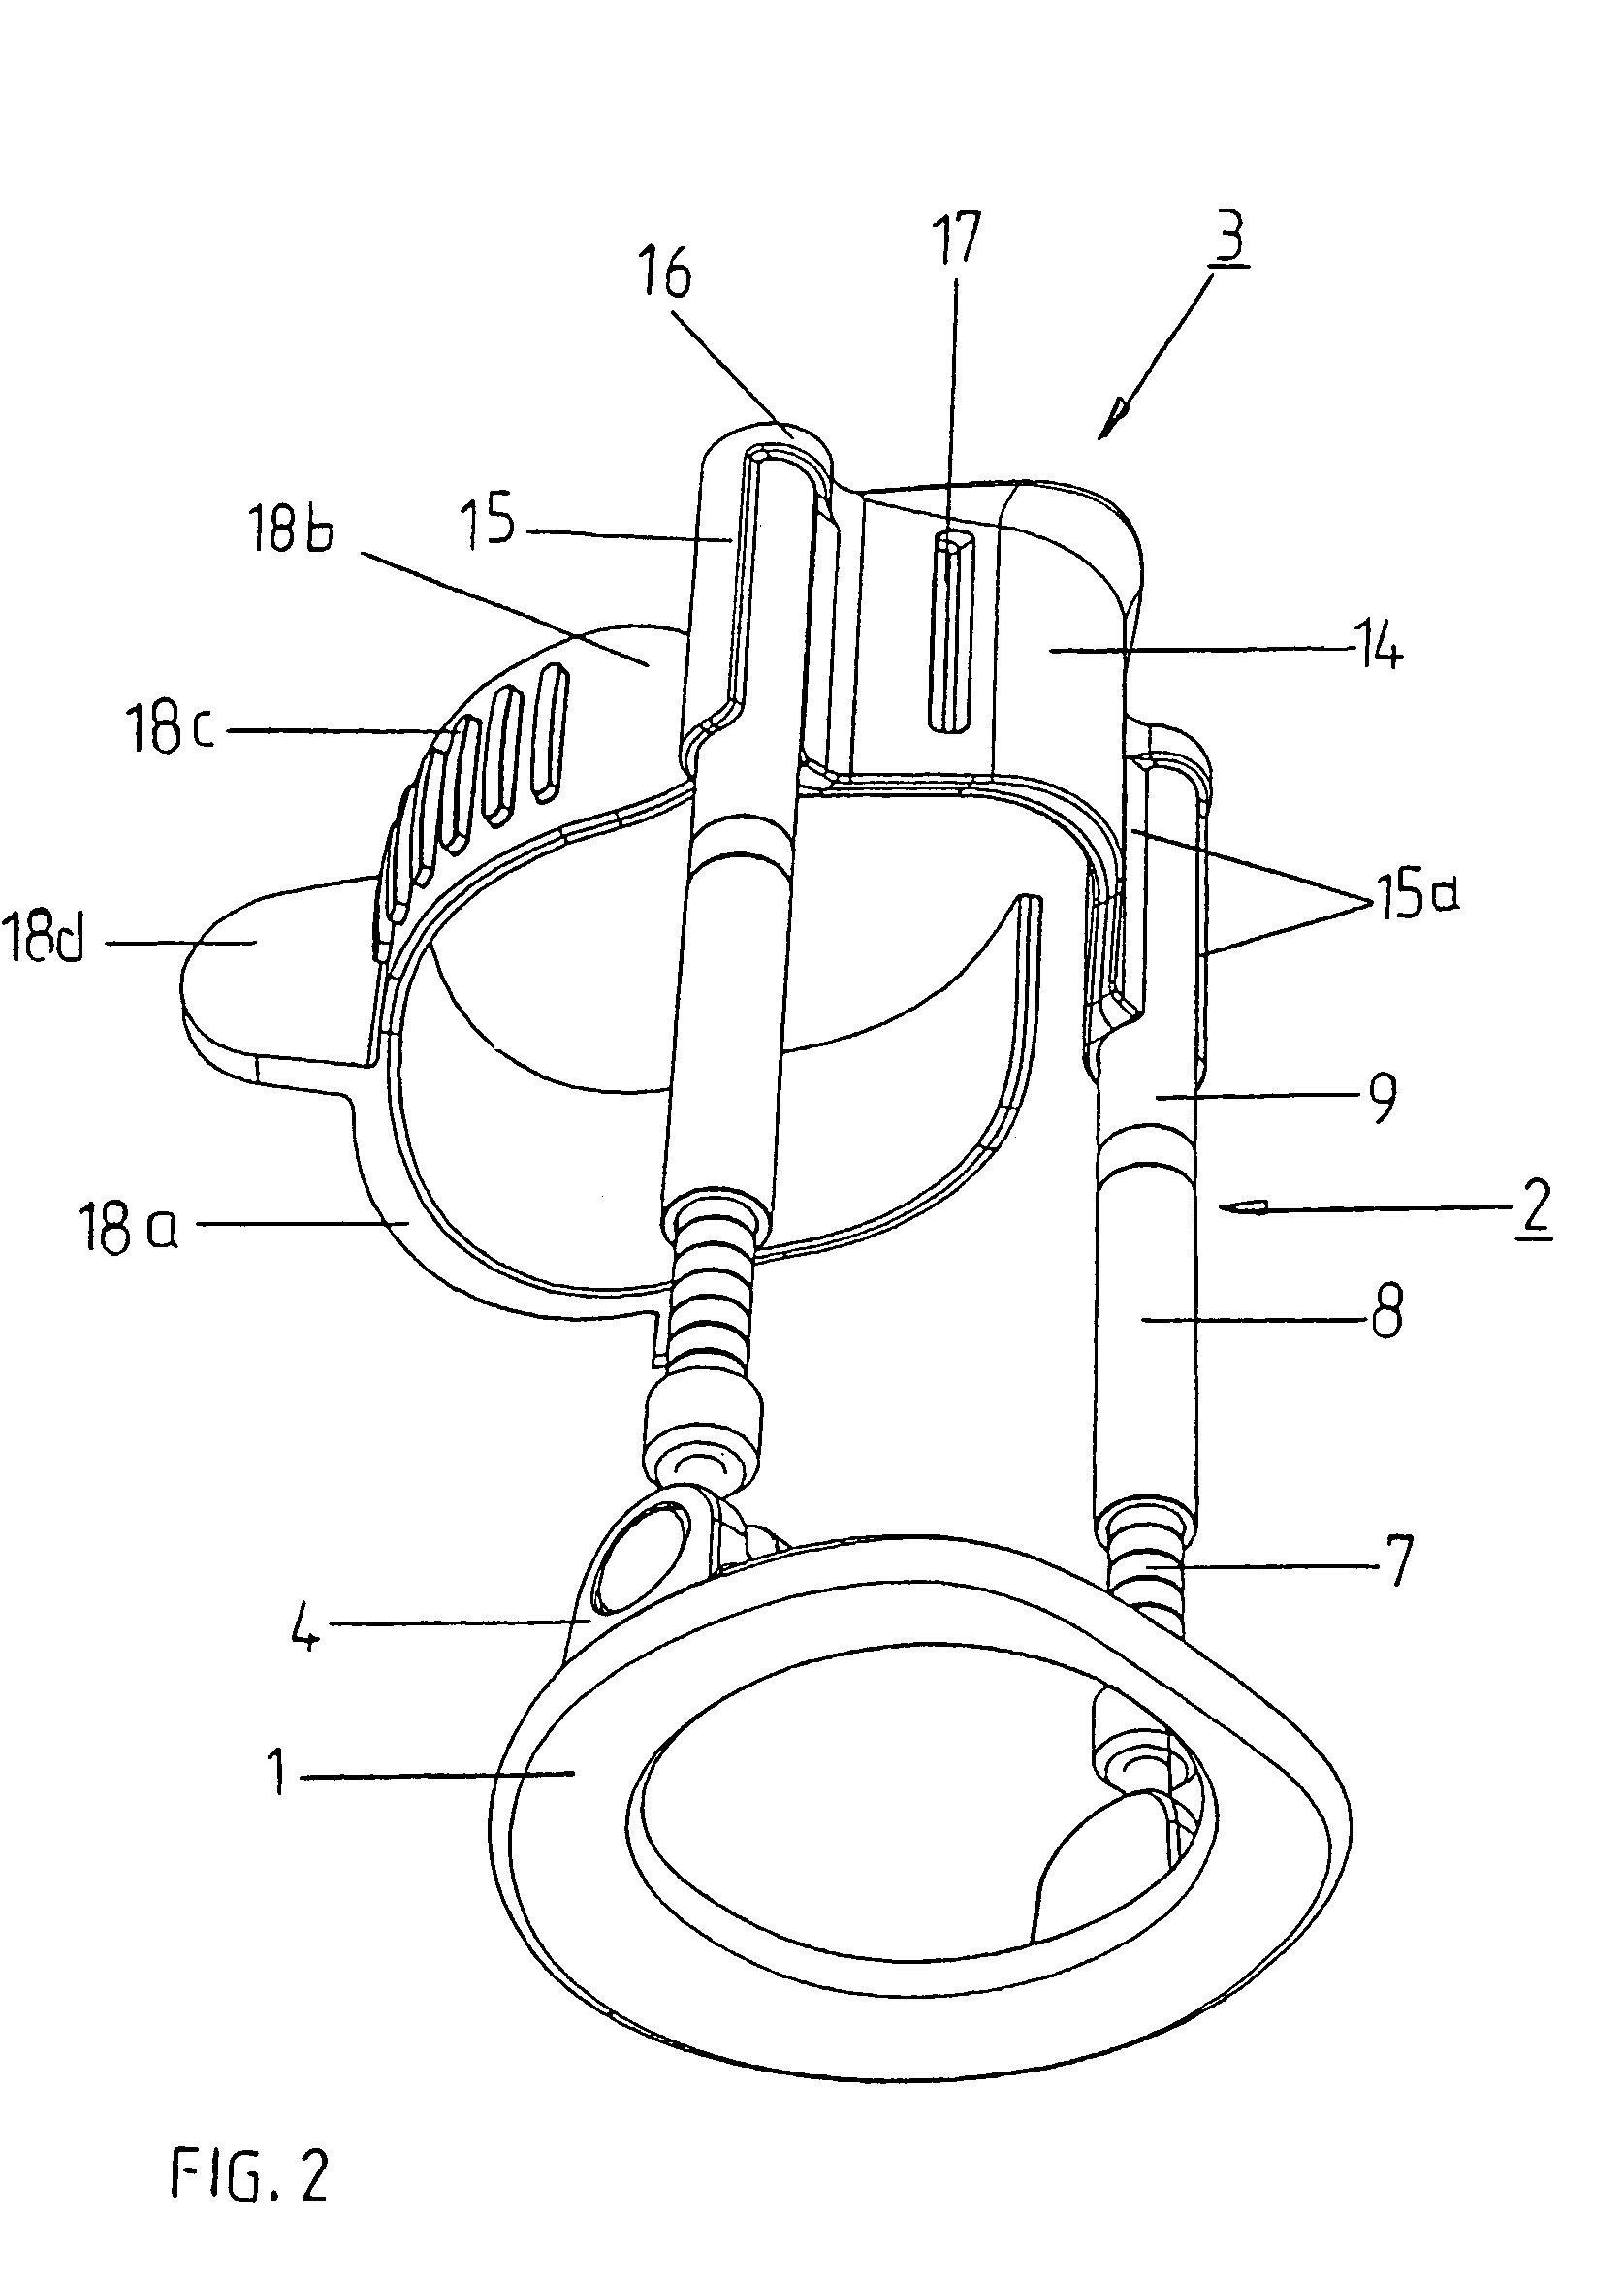 Device for extending elongate body parts